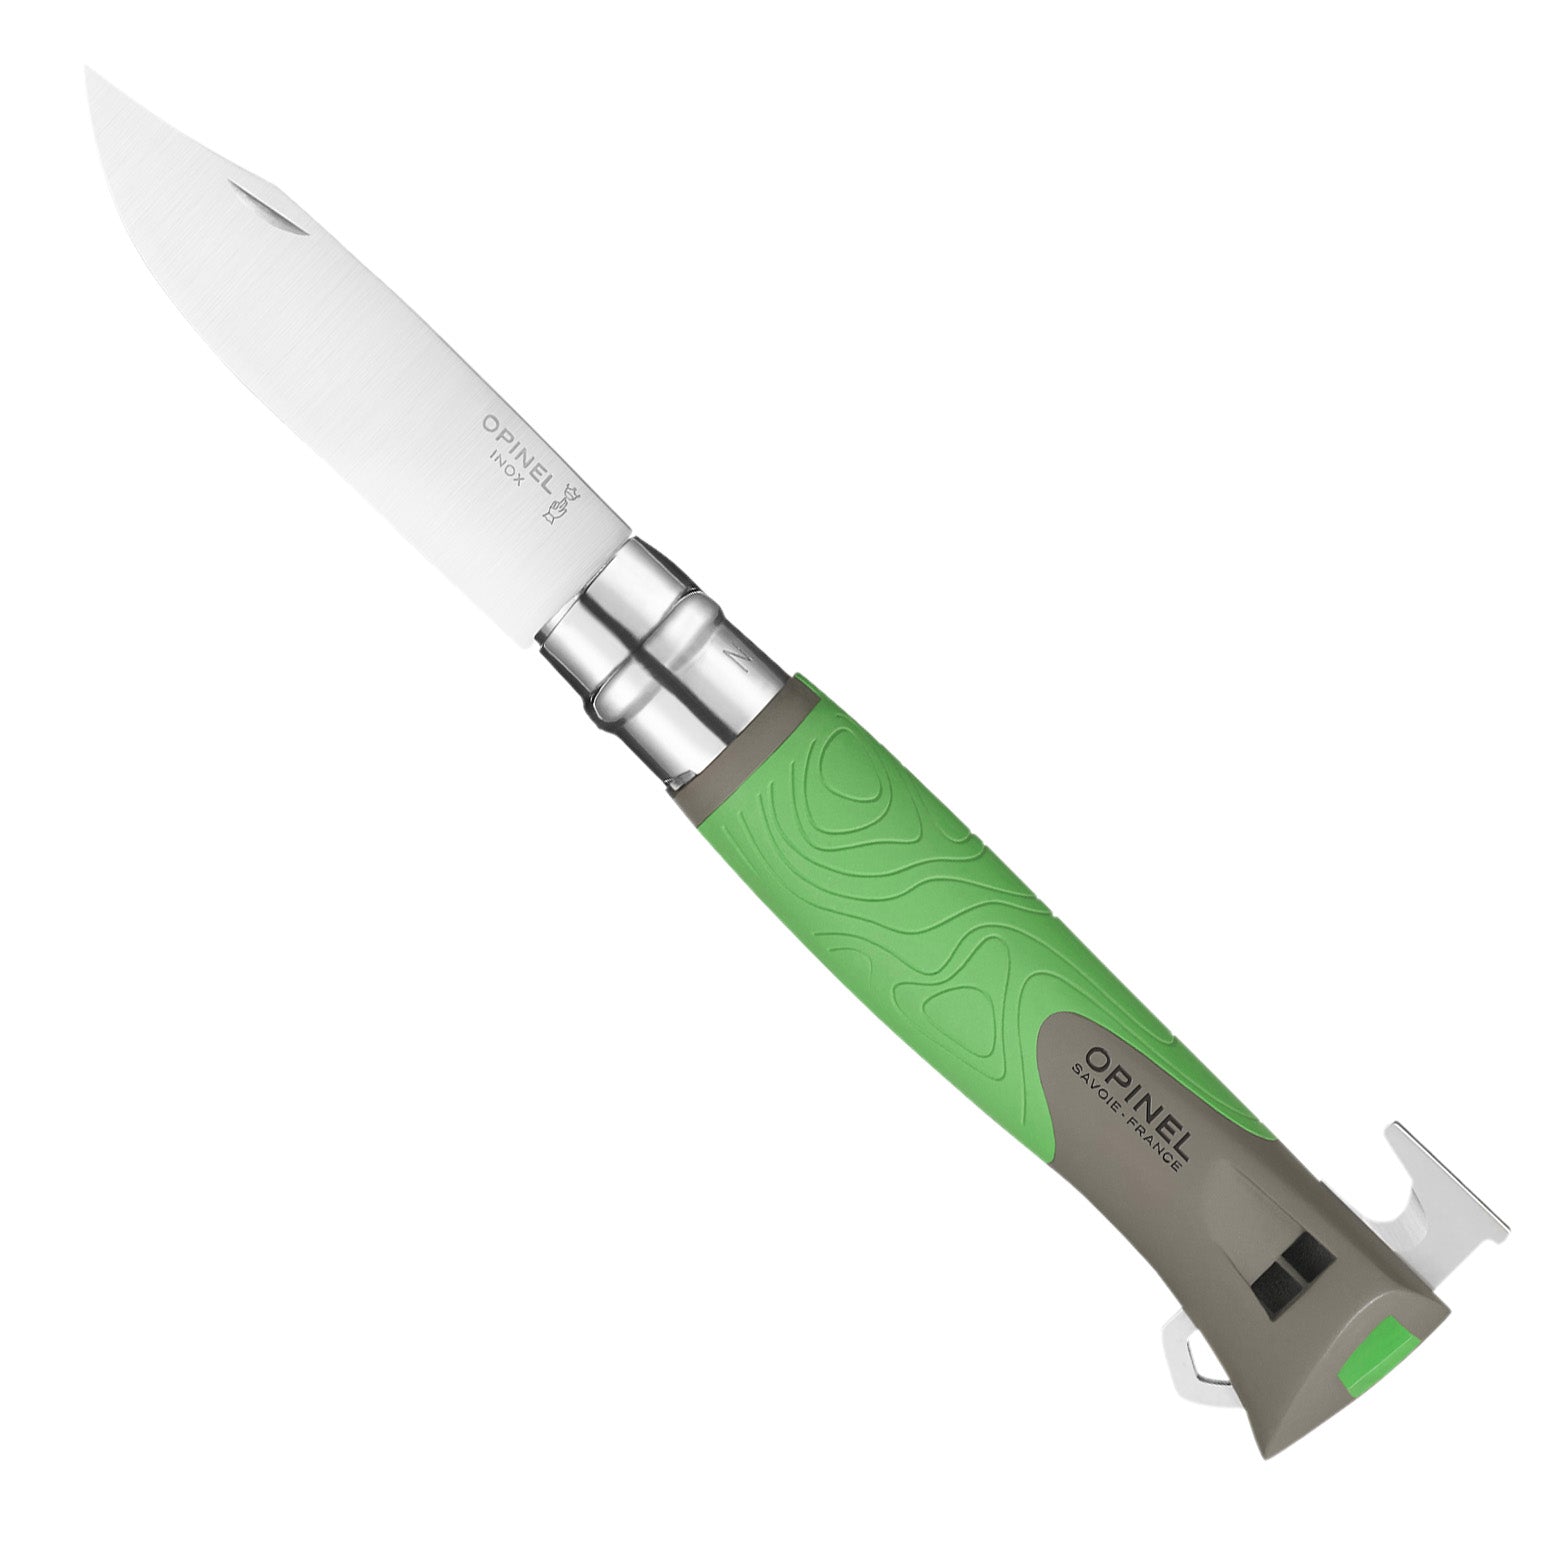  Durable Battery Powered Knife, Stainless Steel